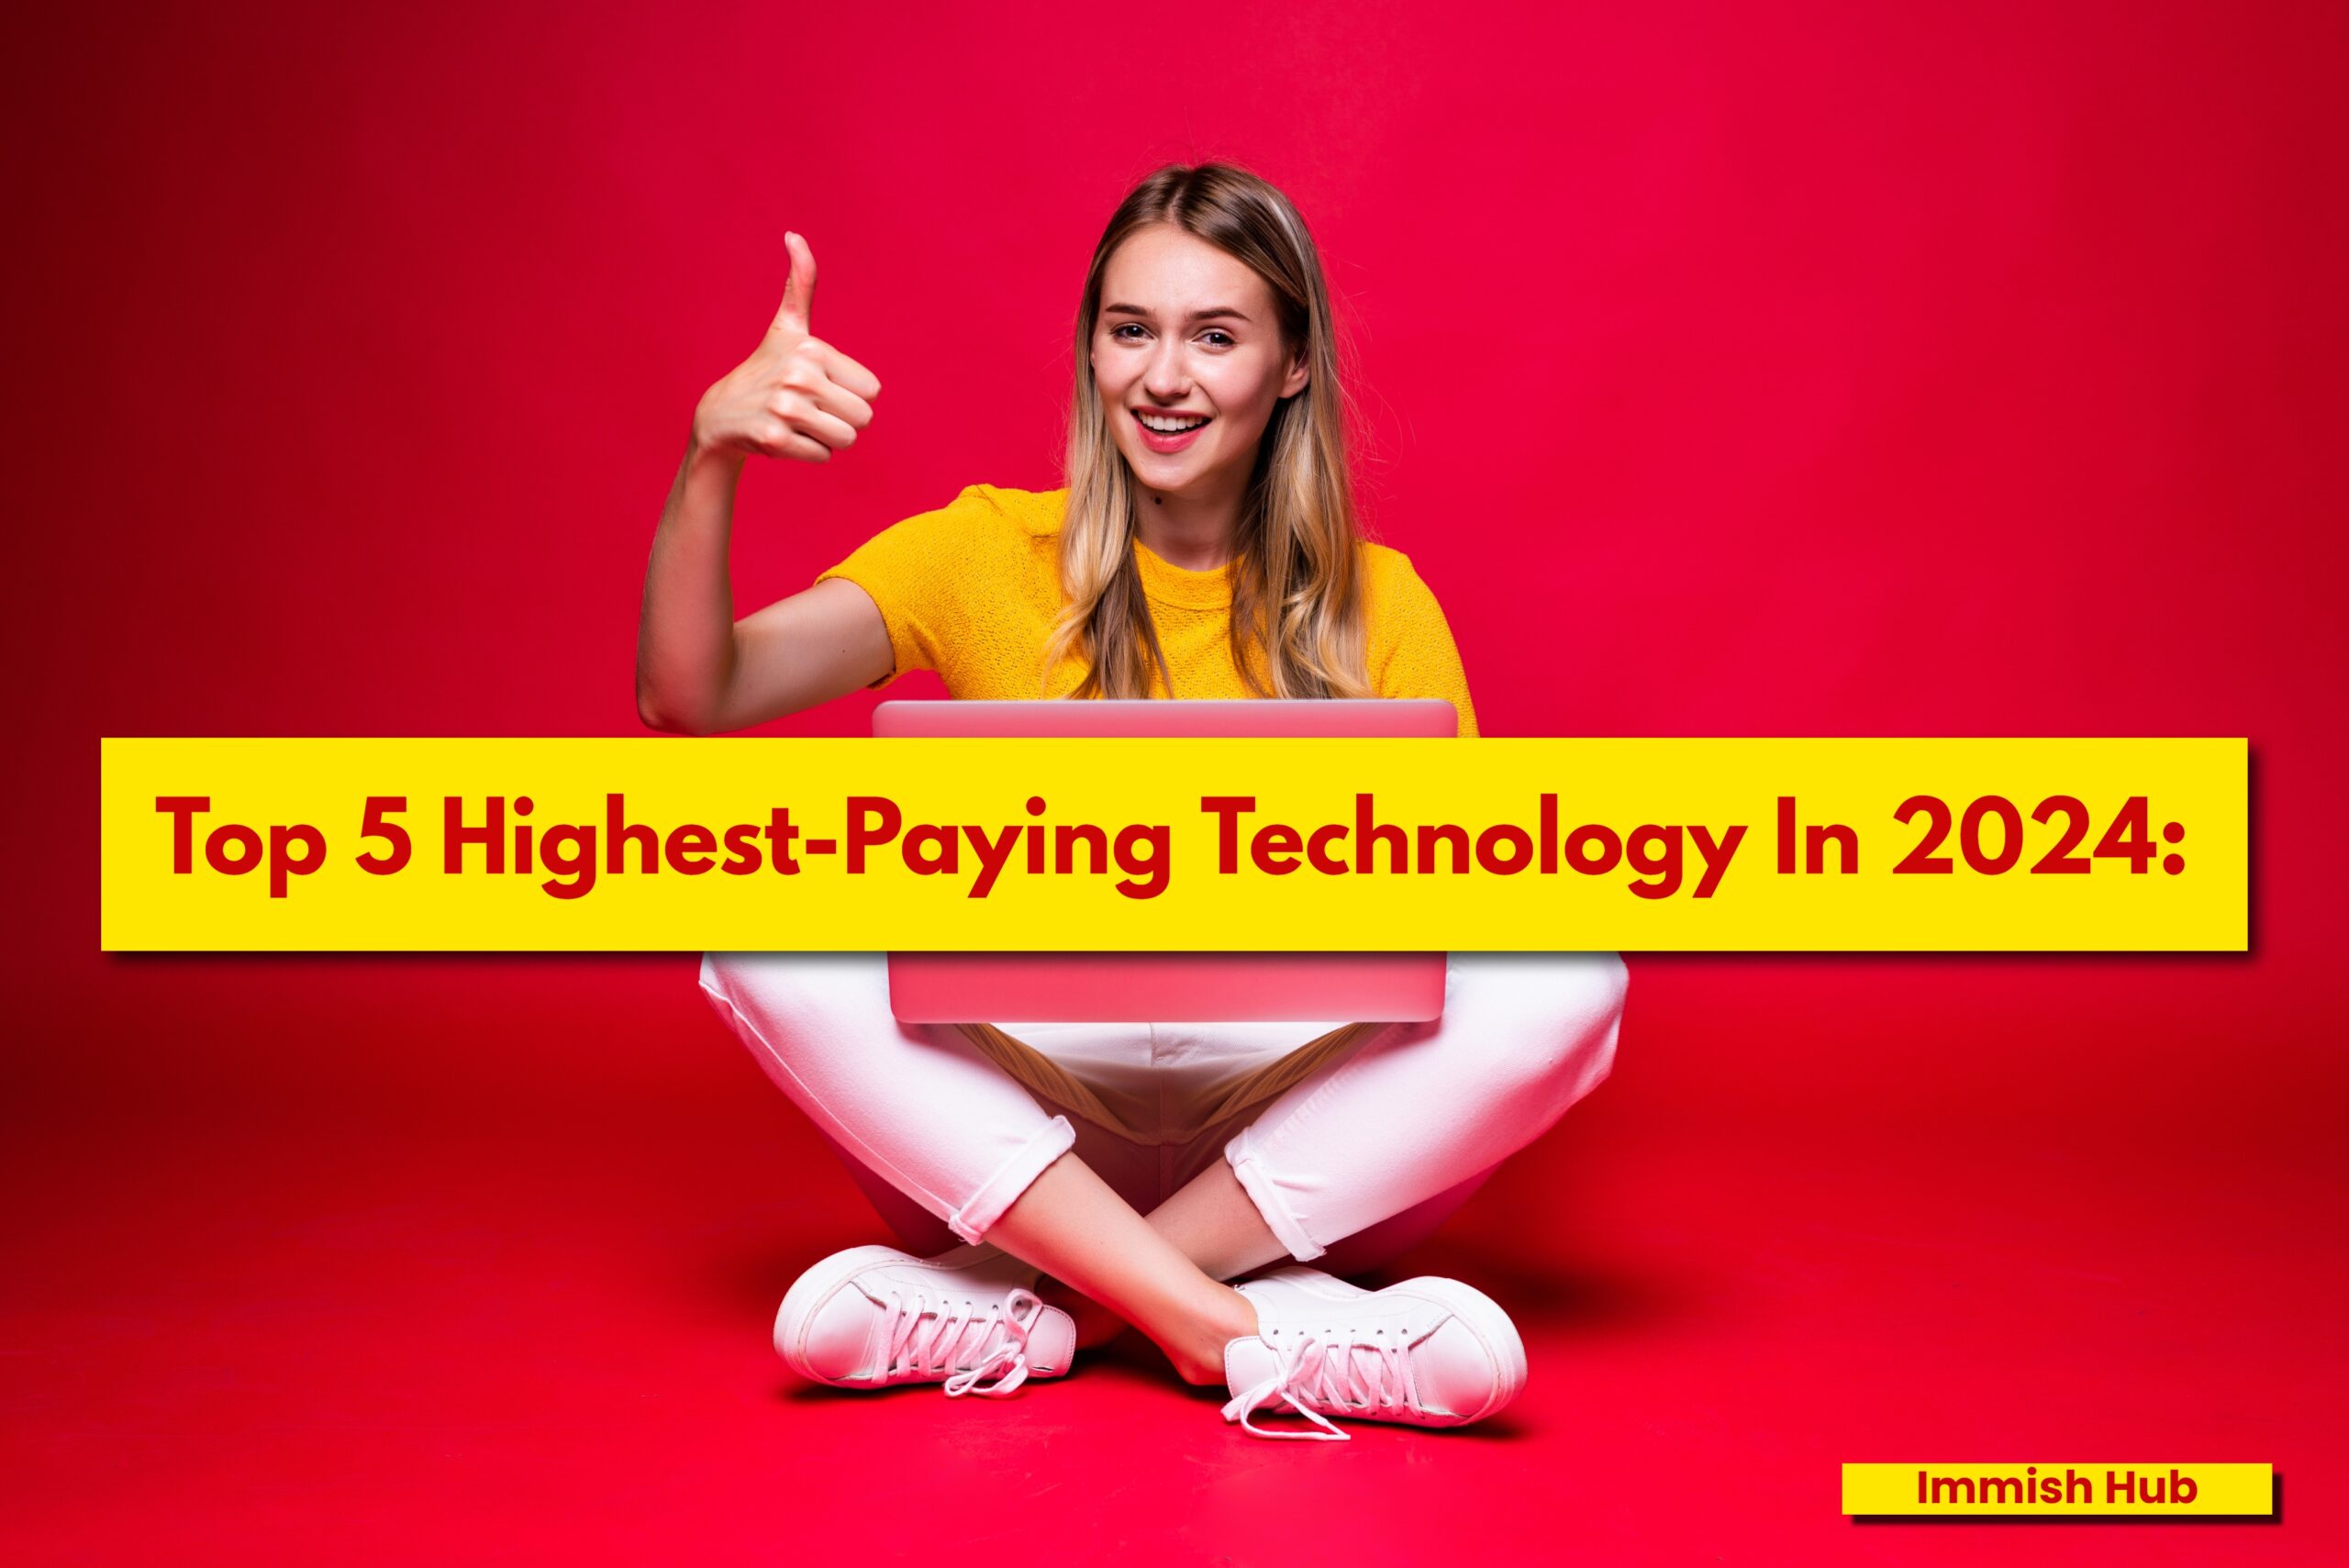 Top 5 Highest-Paying Technology In 2024